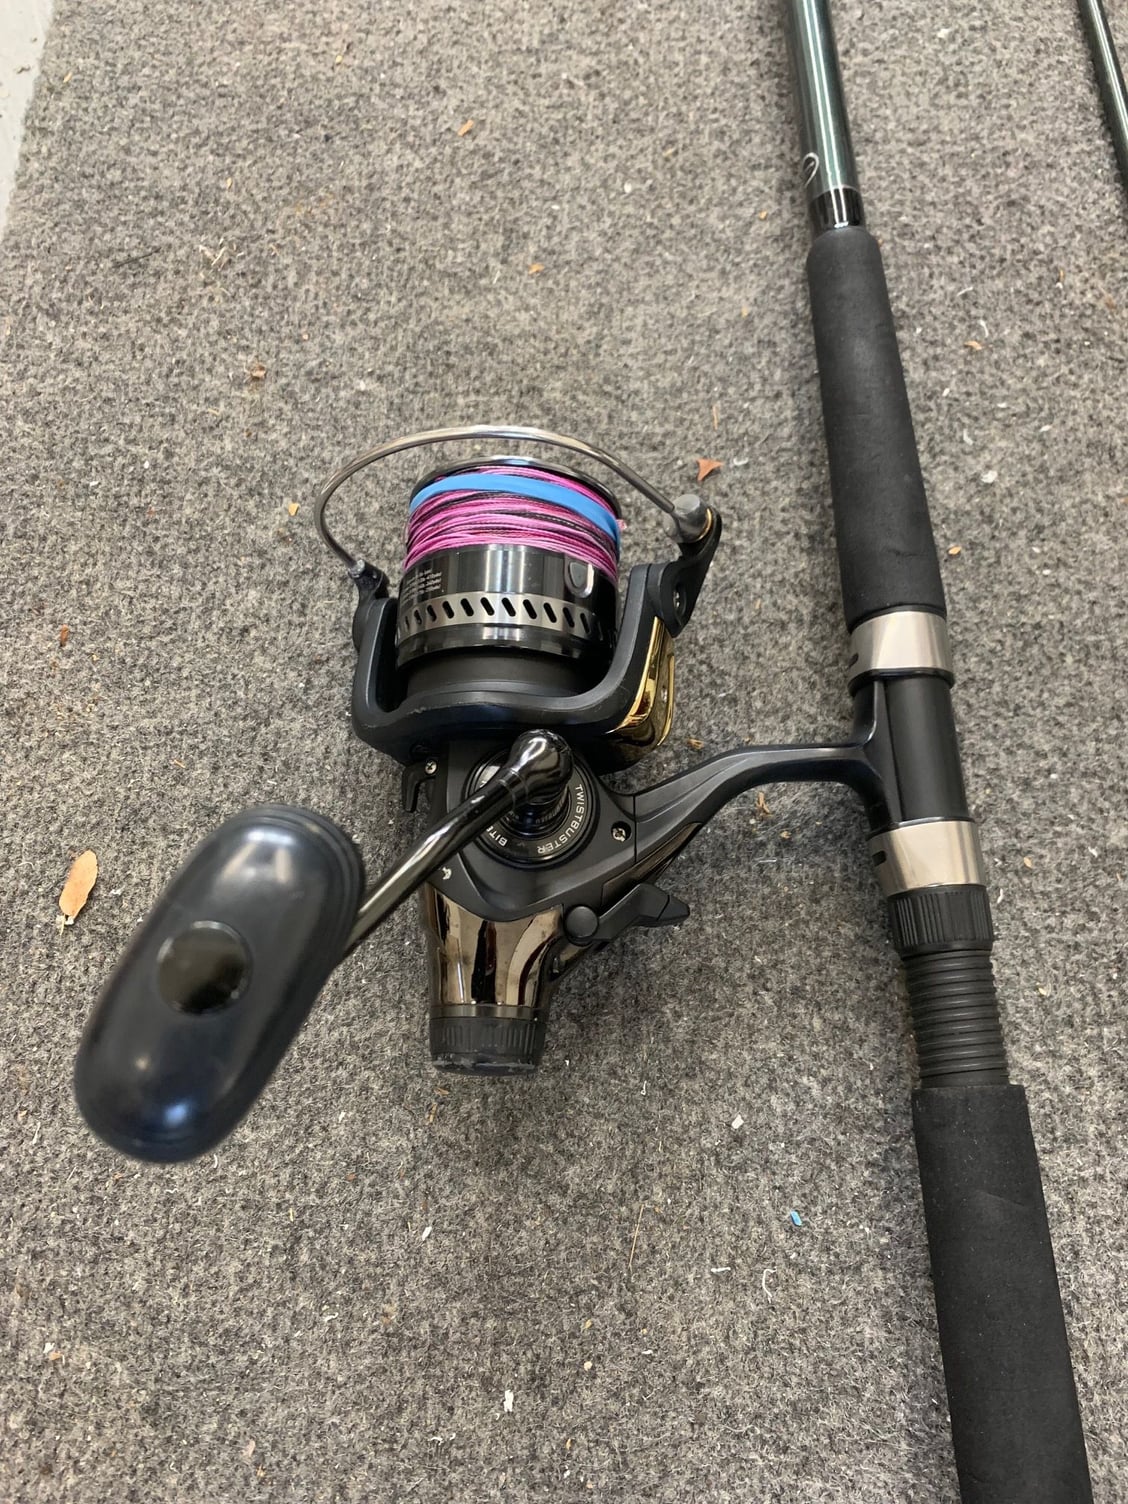 Good pier casting reel for casting heavy weights? - The Hull Truth -  Boating and Fishing Forum